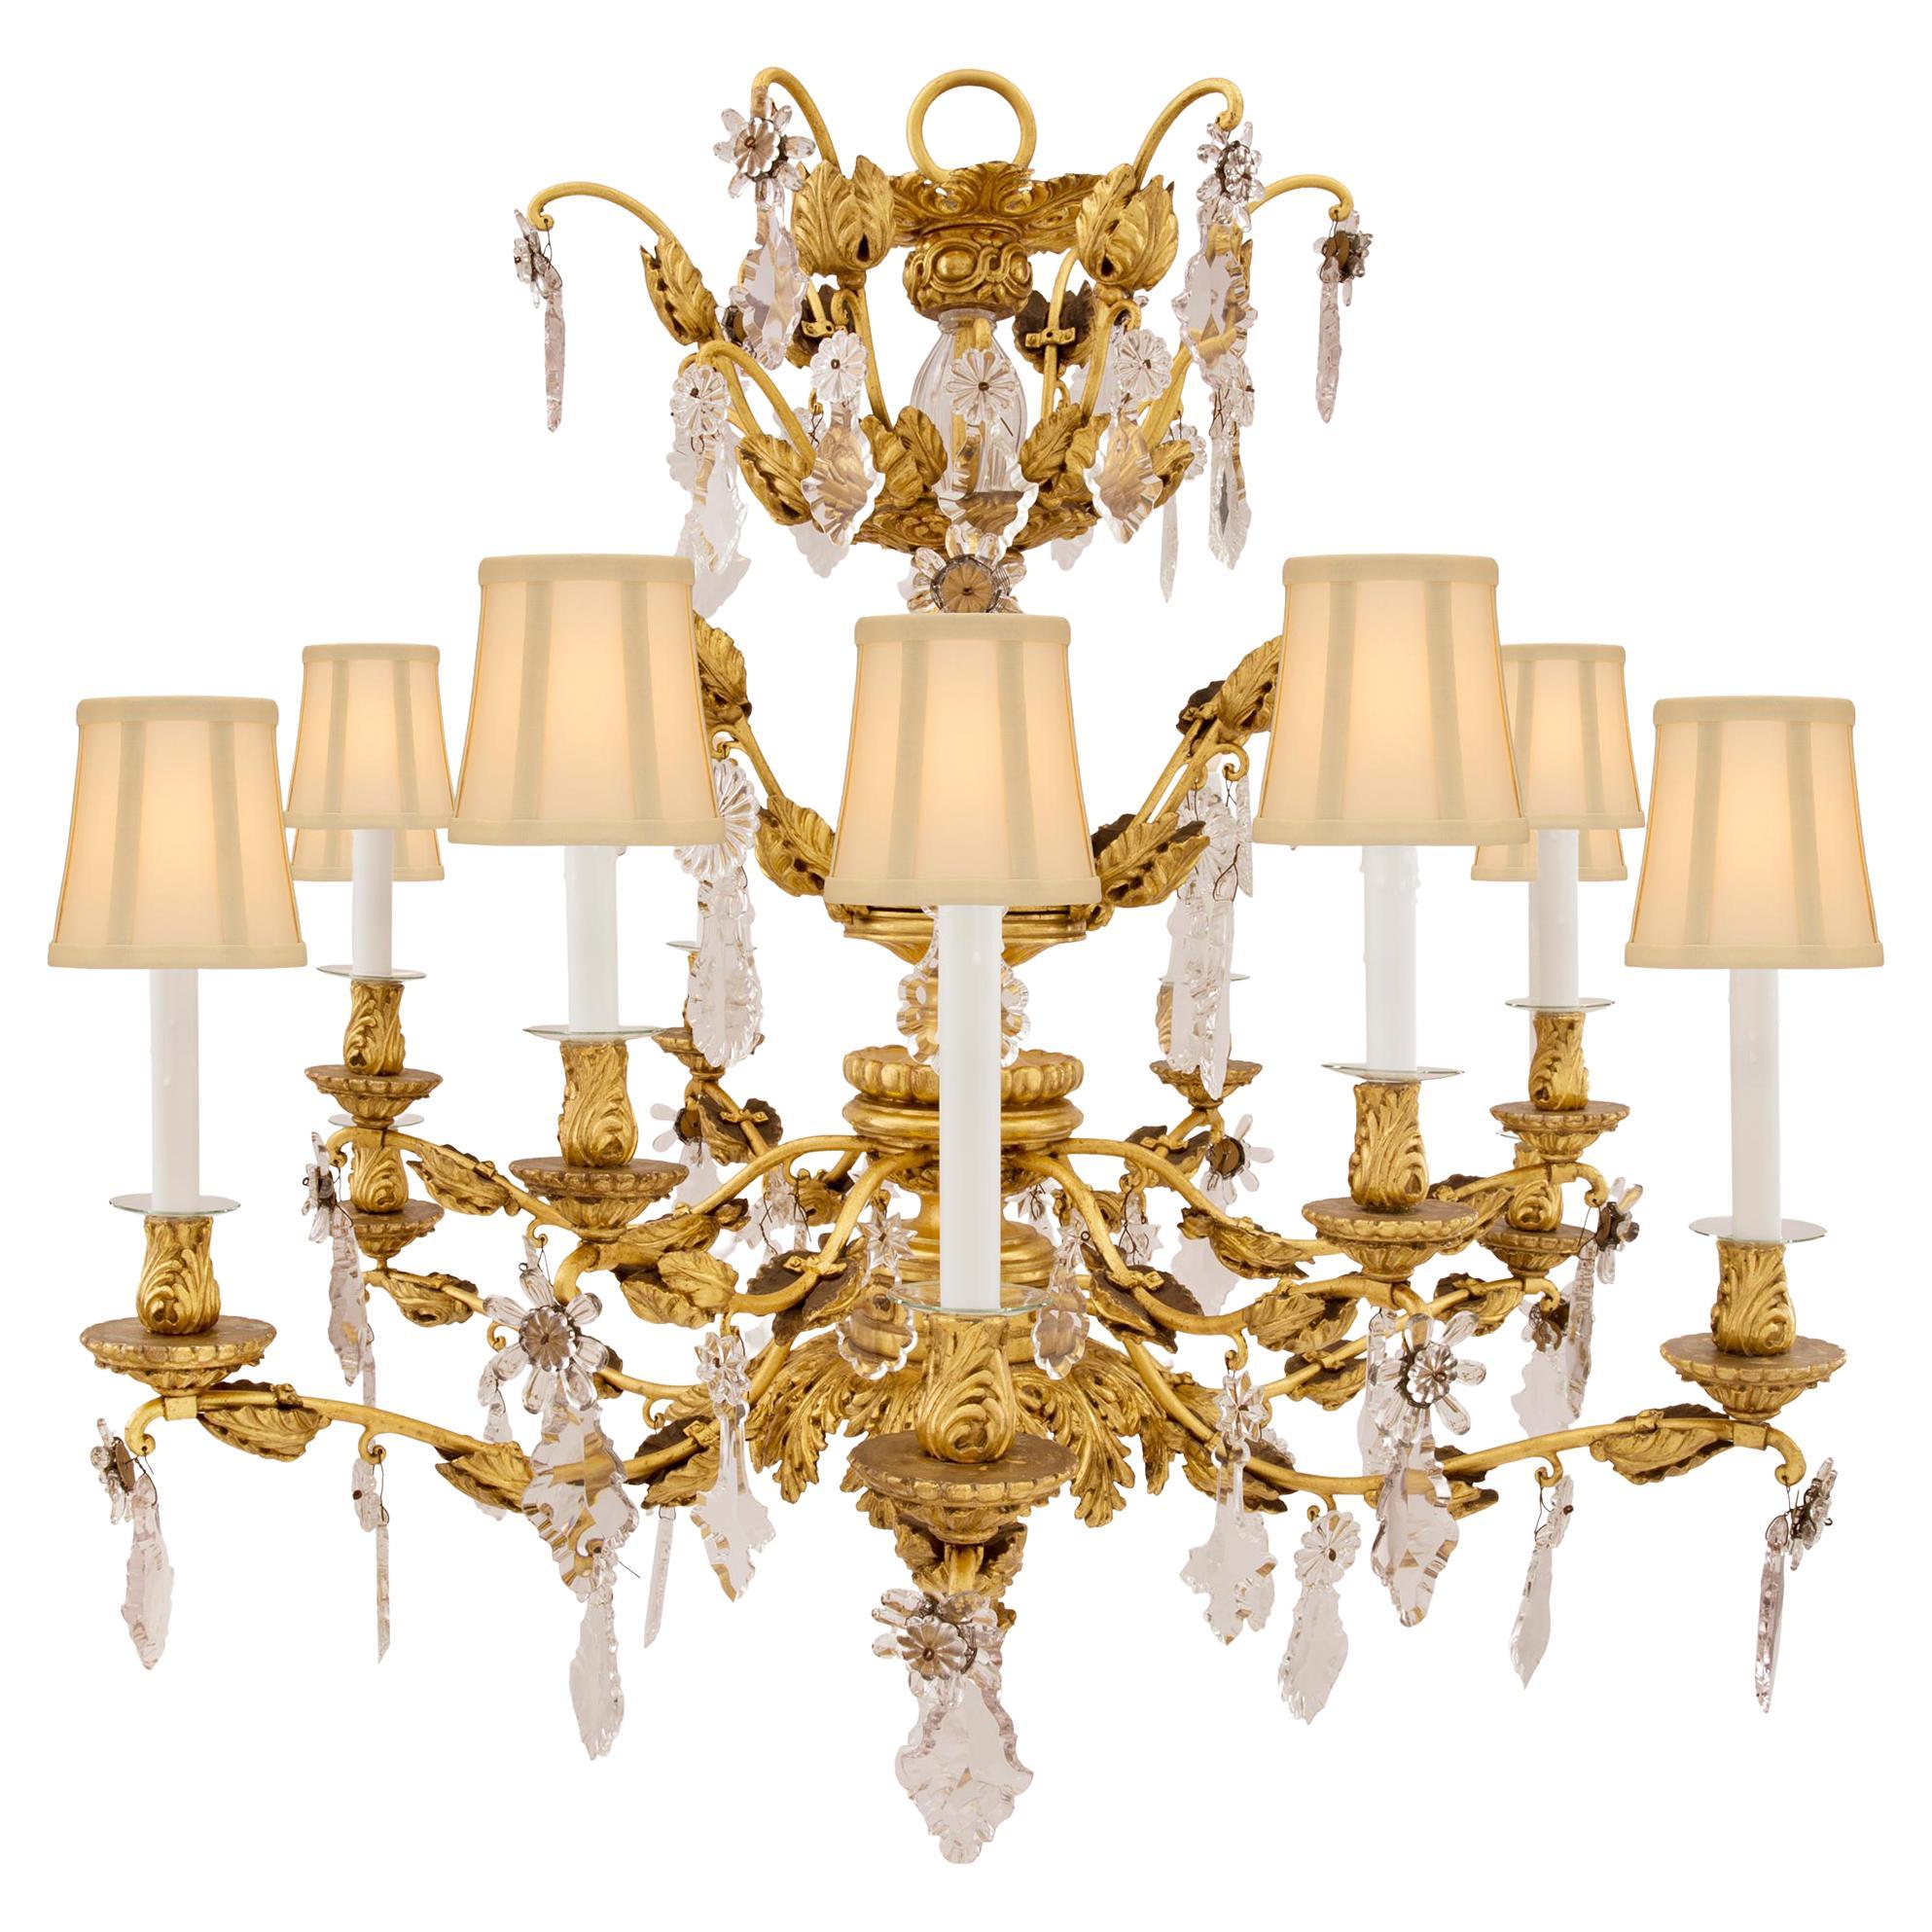 Italian Early 19th Century Tuscan Giltwood, Gilt Metal and Crystal Chandelier For Sale